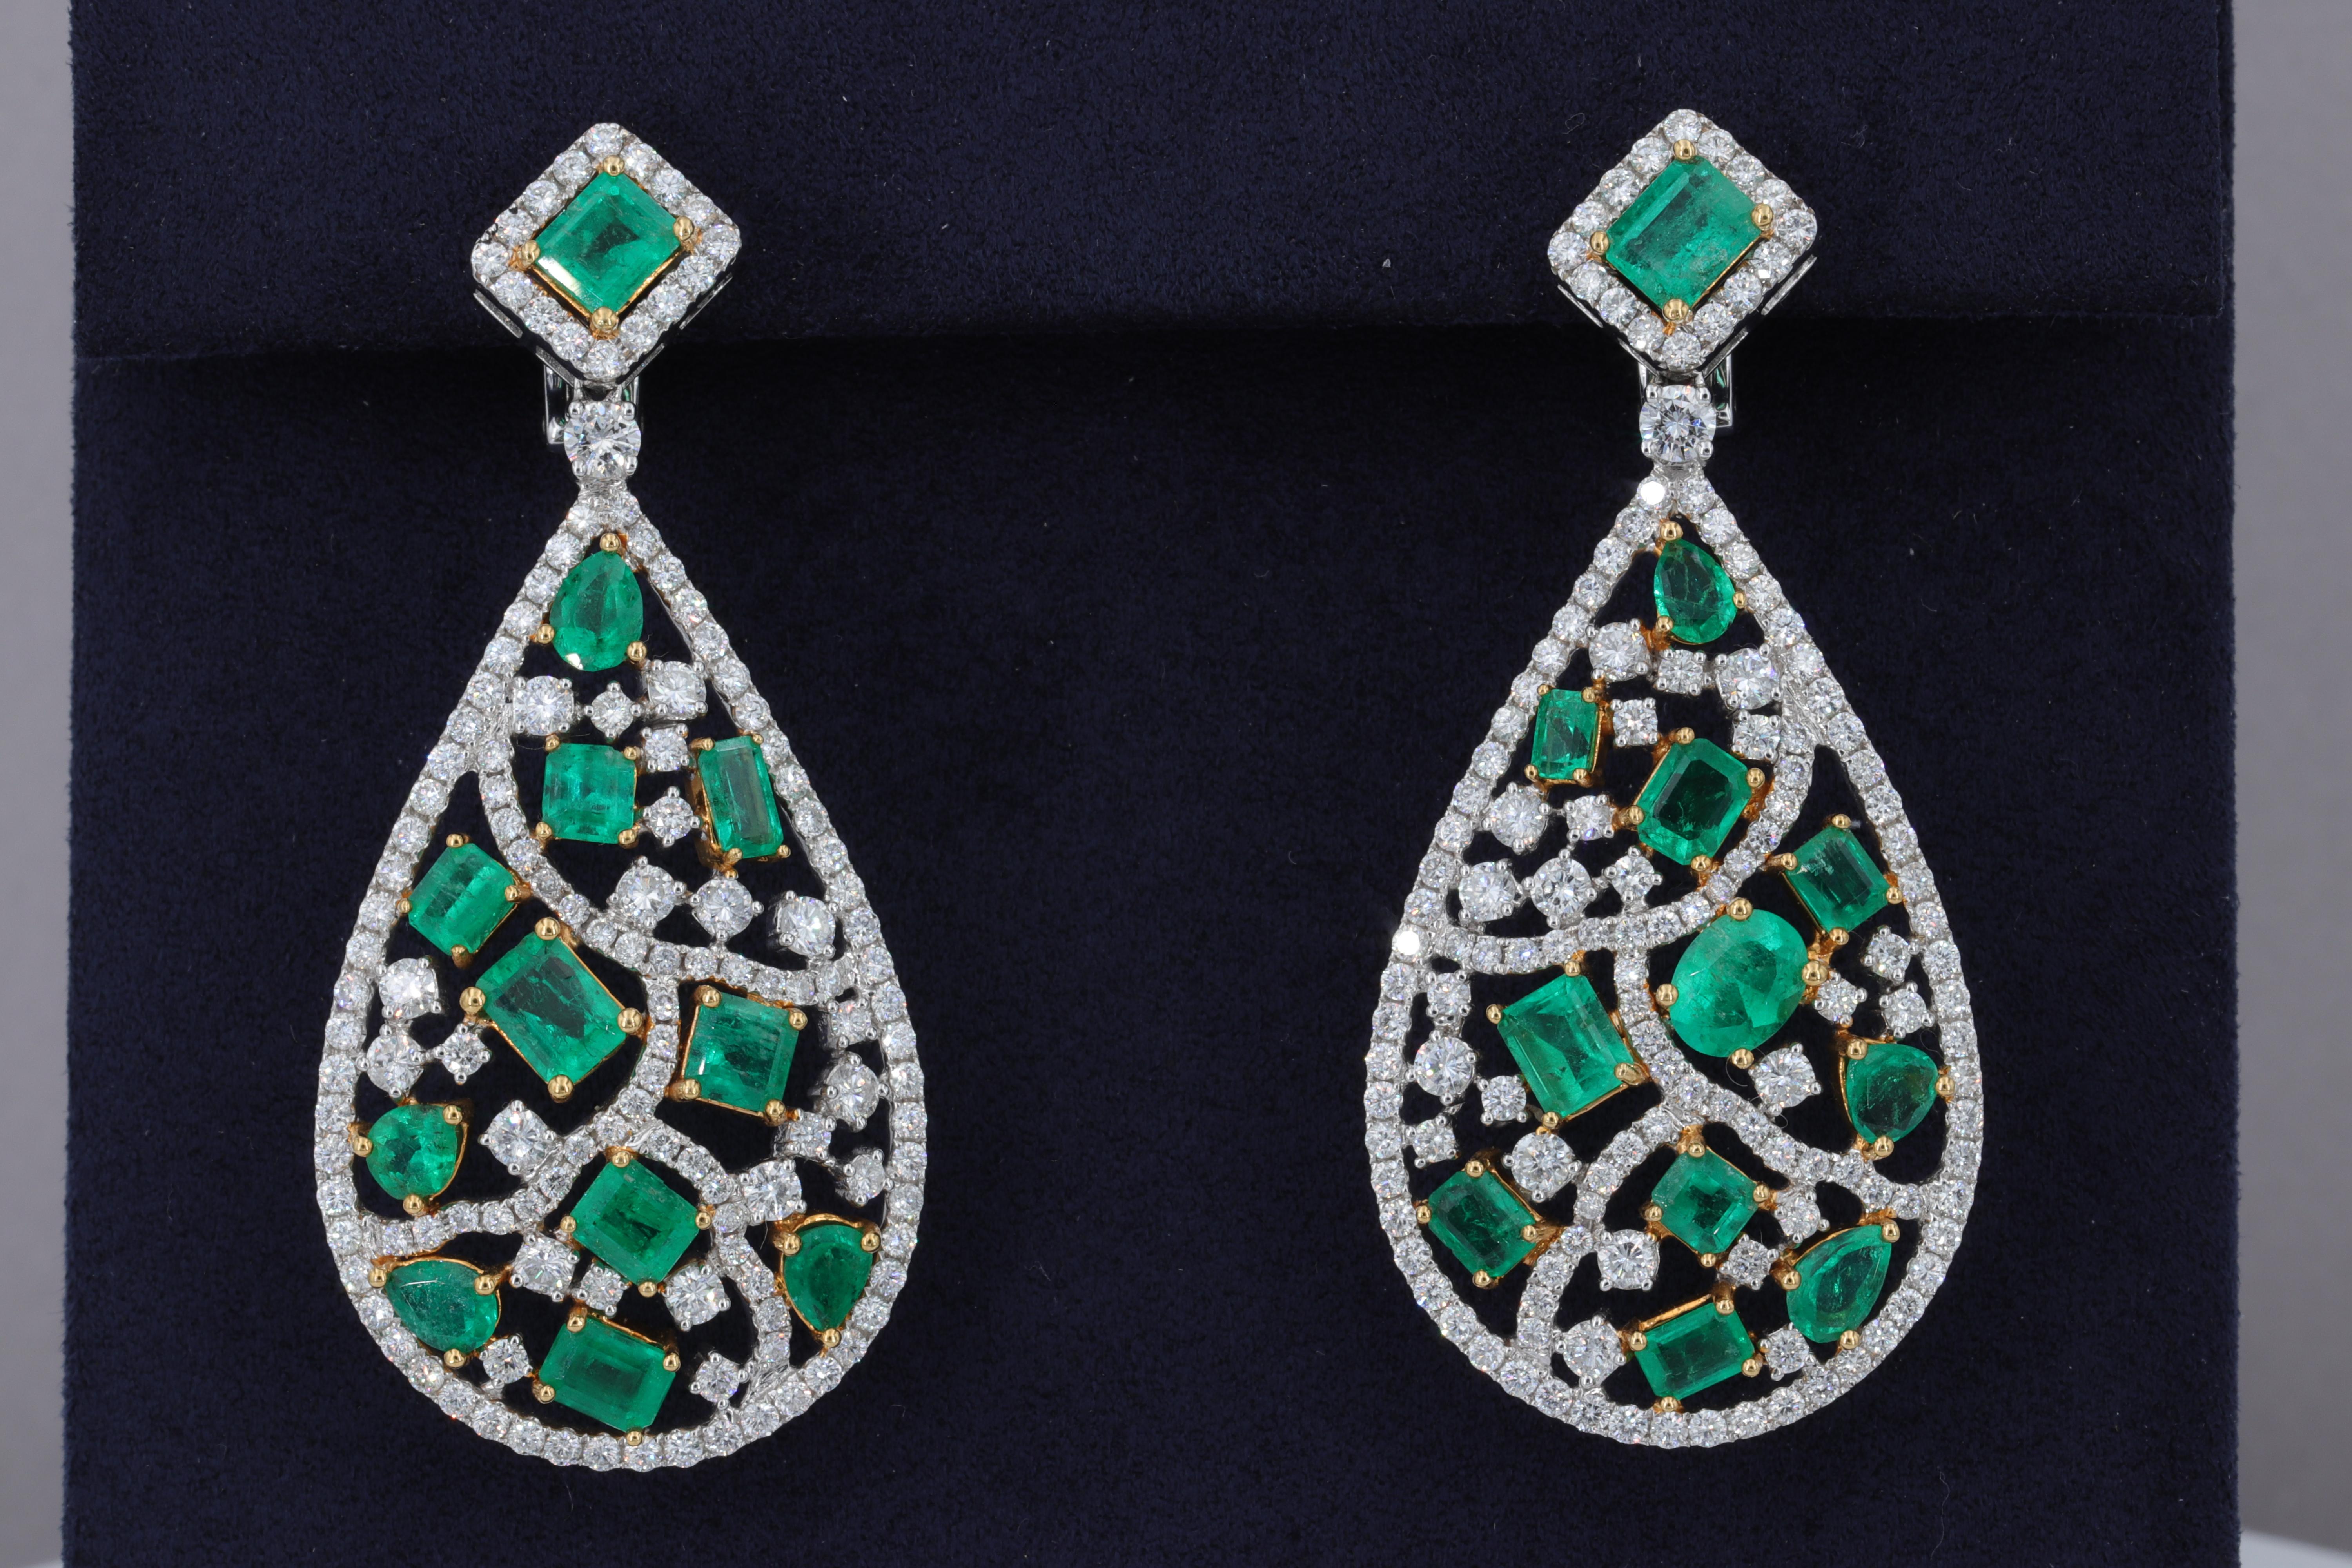 12.11 Carat Colombian Emerald and 5.08 Carat Diamond Drop Earrings

This exceptional pair of Colombian Emerald and Diamond drop earrings is set with approximately 12.11 carats of fine quality emerald cut Colombian emeralds and approximately 5.08